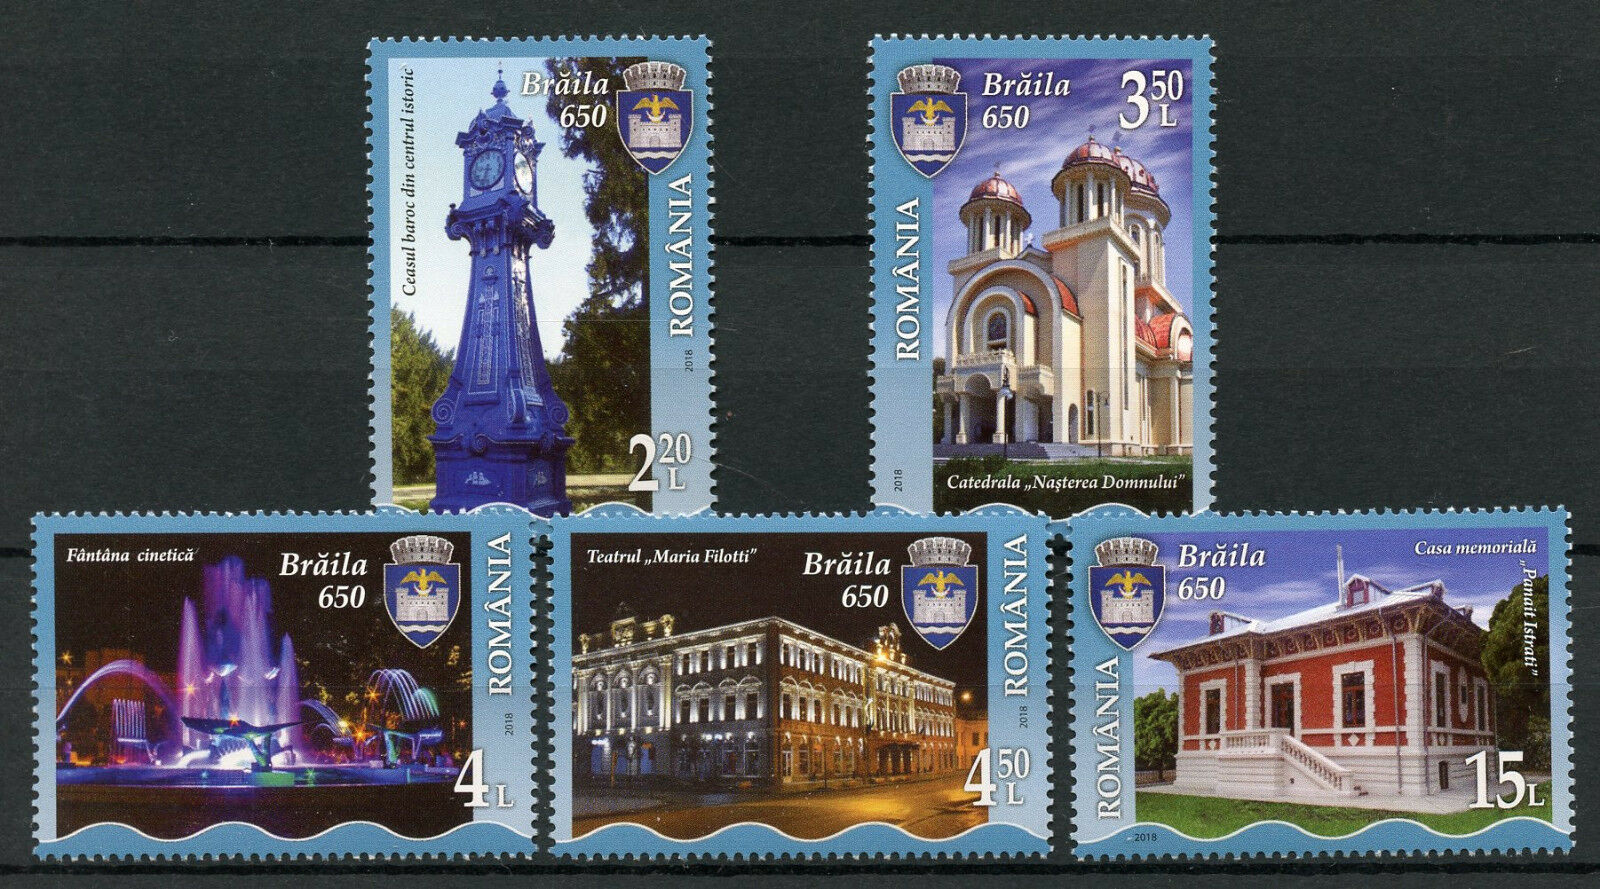 Romania 2018 MNH Braila 650 Yrs 5v Set Fountains Cathedrals Architecture Stamps